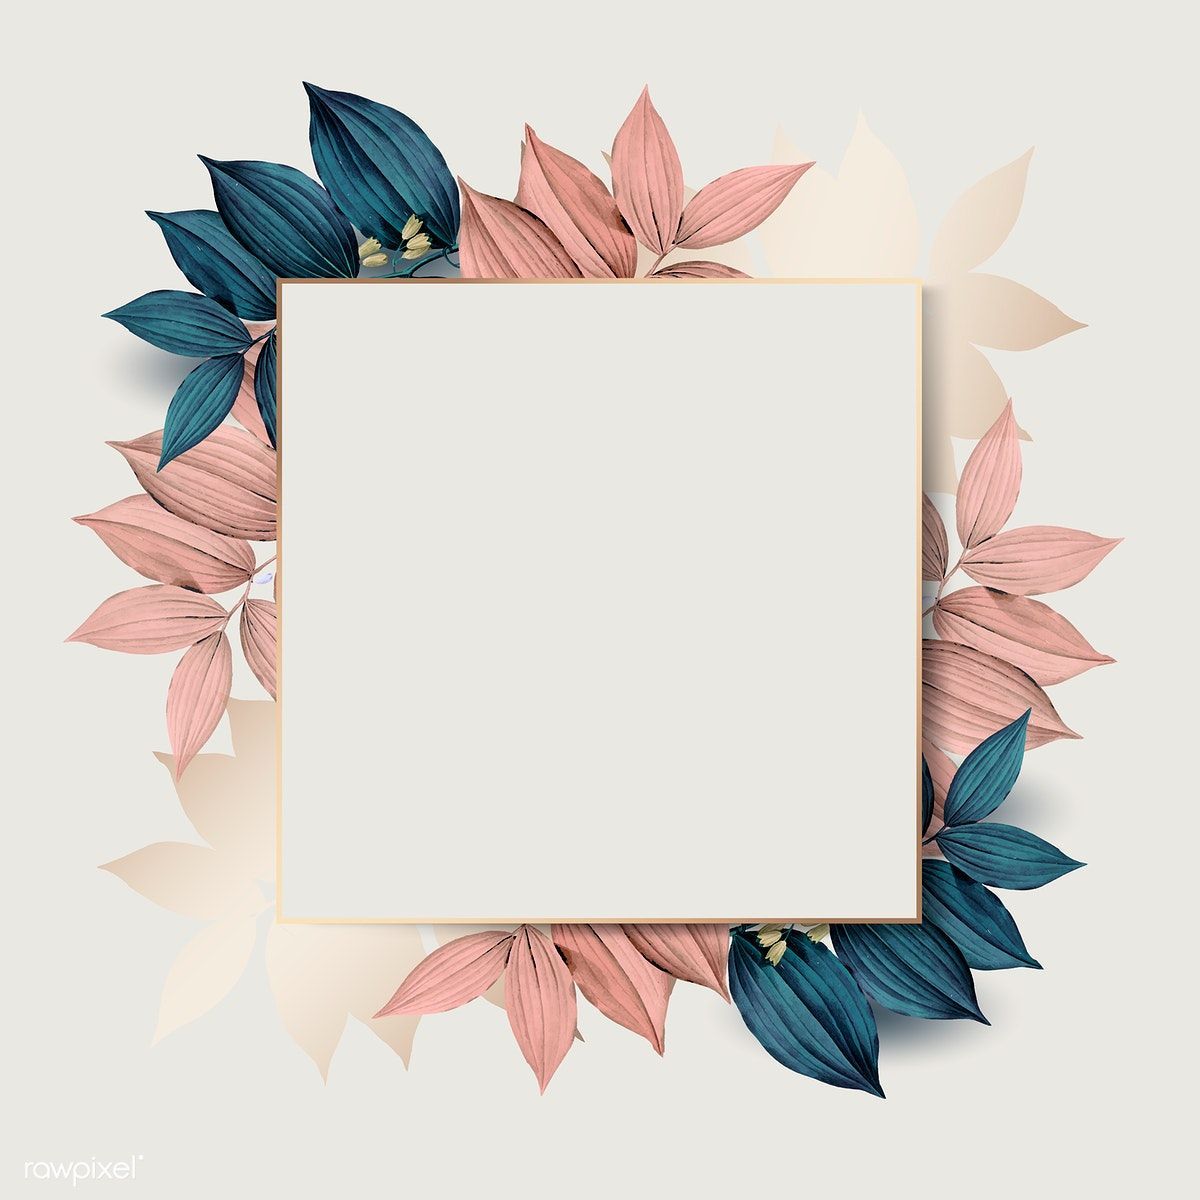 Download premium vector of Square gold frame on pink and blue leaf pattern